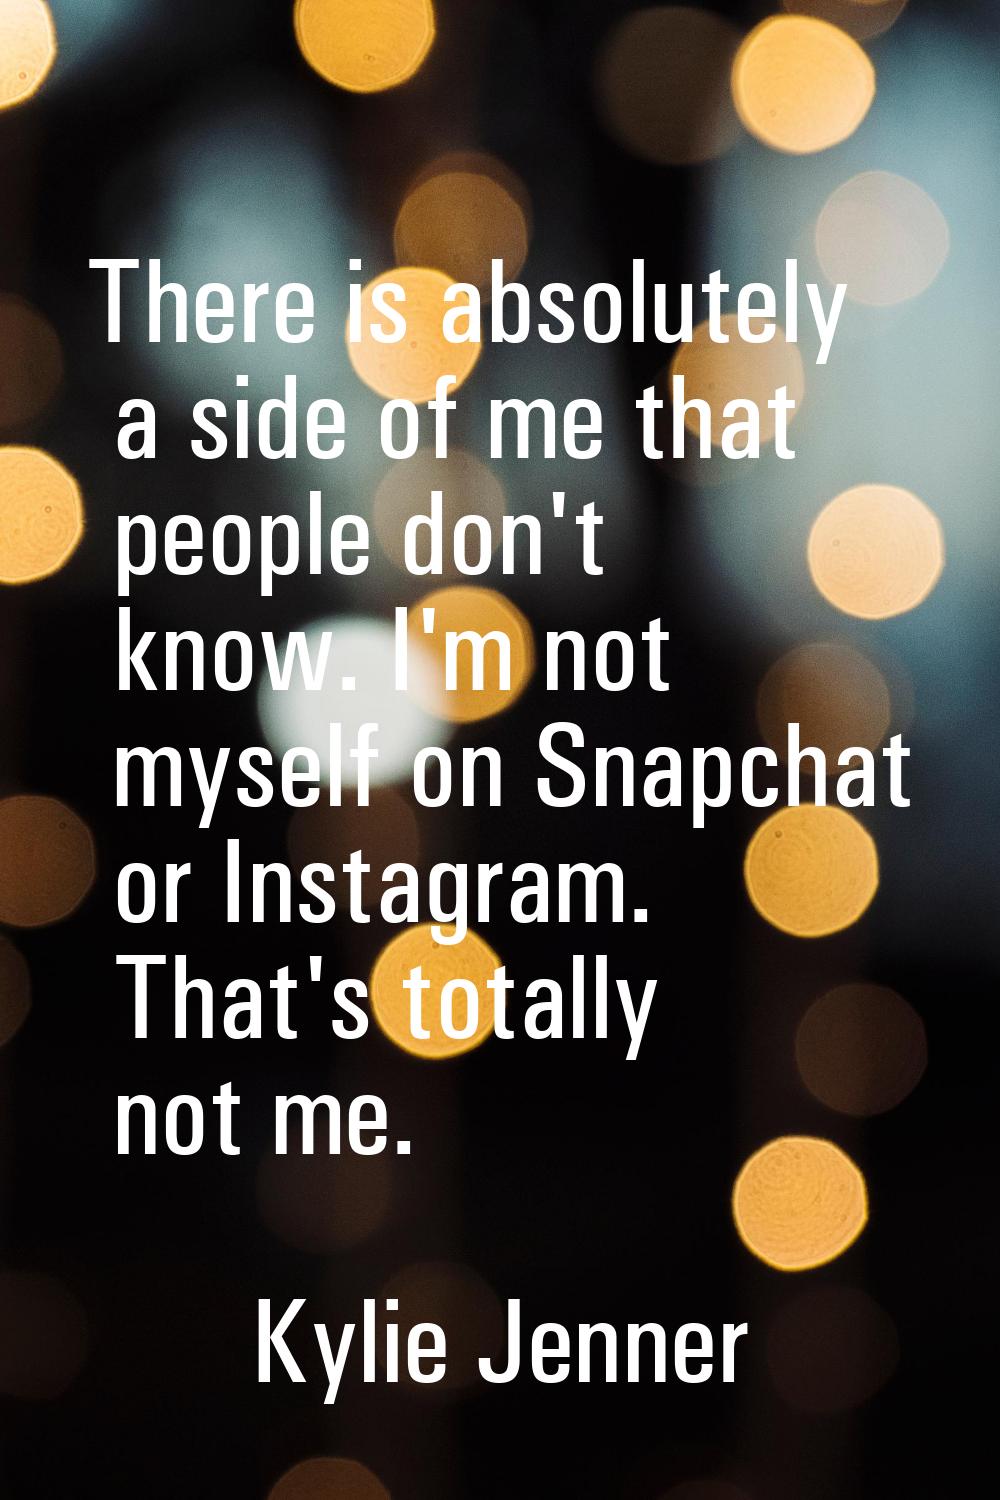 There is absolutely a side of me that people don't know. I'm not myself on Snapchat or Instagram. T